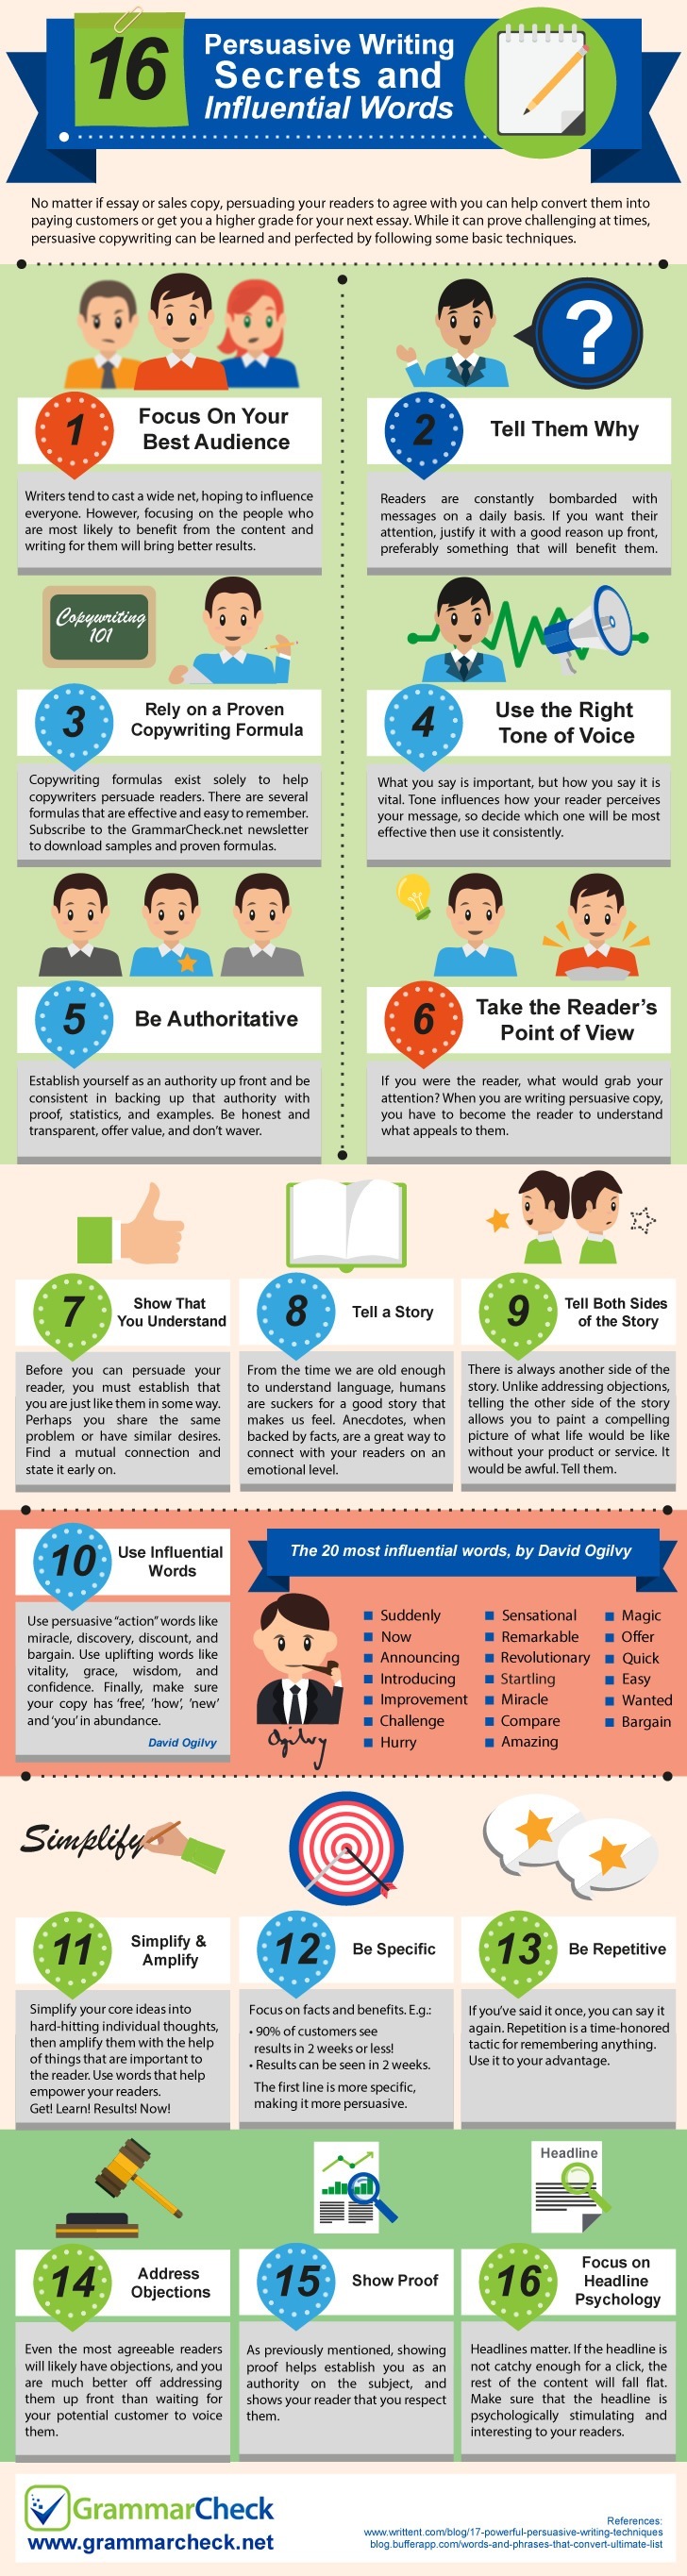 16 Persuasive Writing Secrets & Influential Words (Infographic)